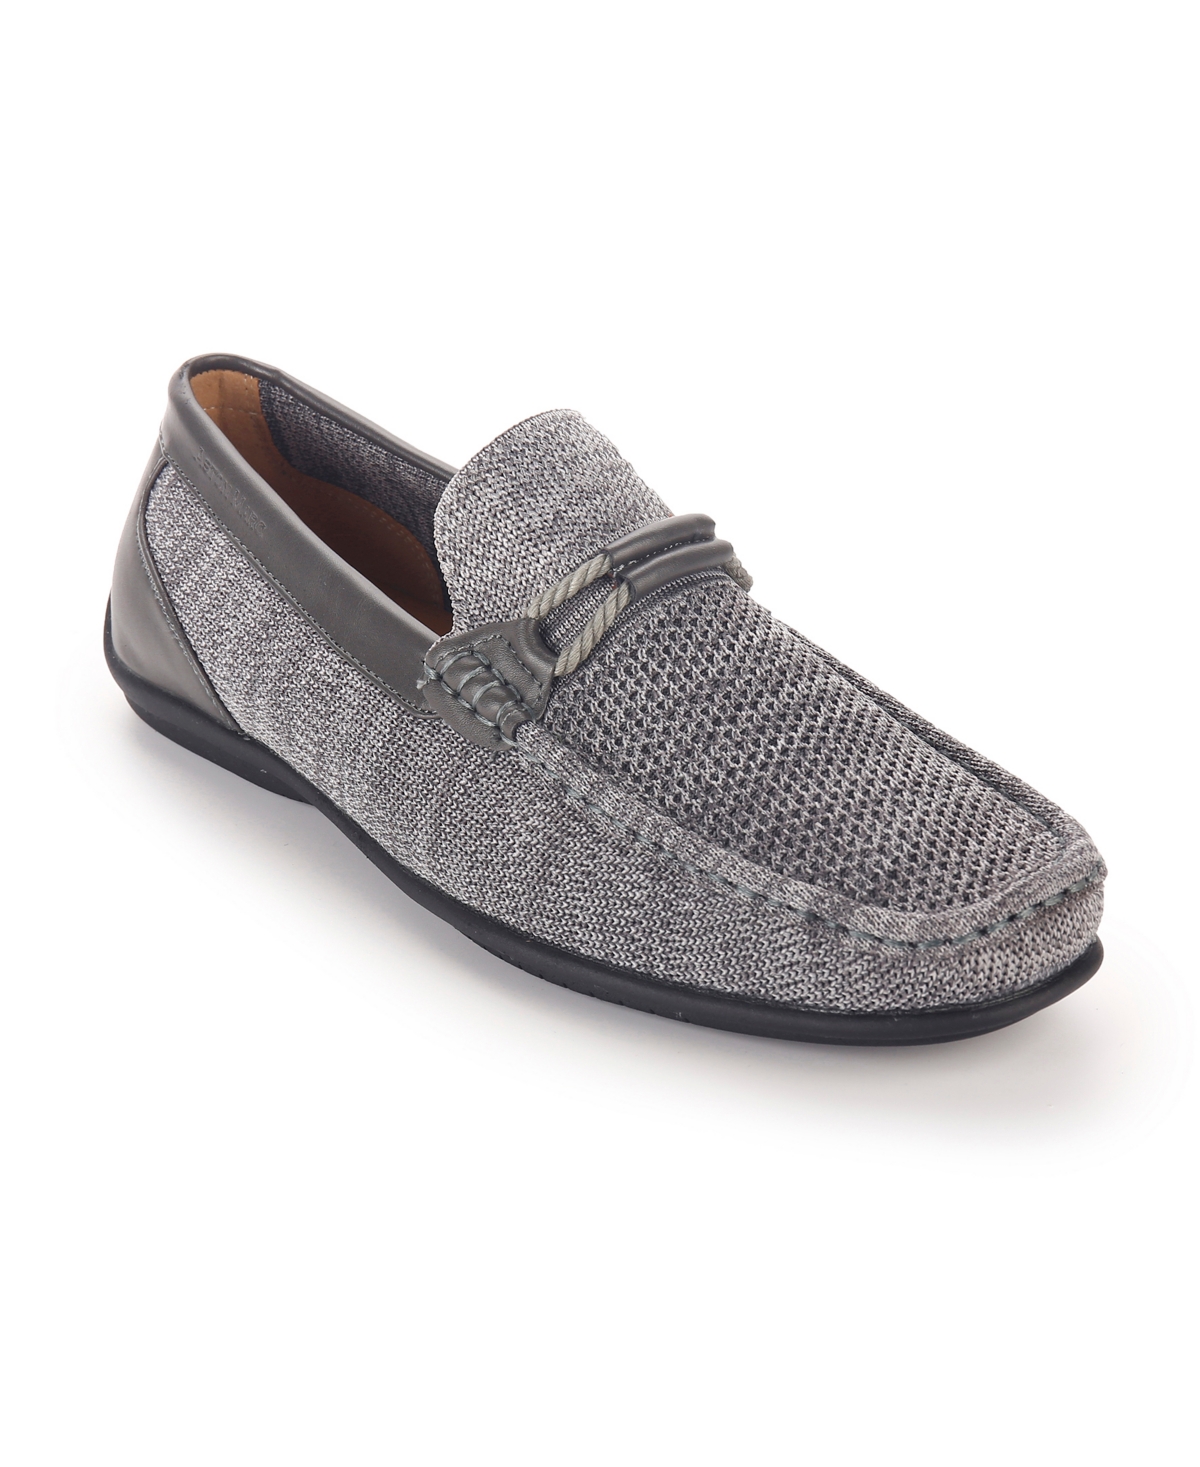 Men's Knit Lace-Strap Driving Loafer - Navy